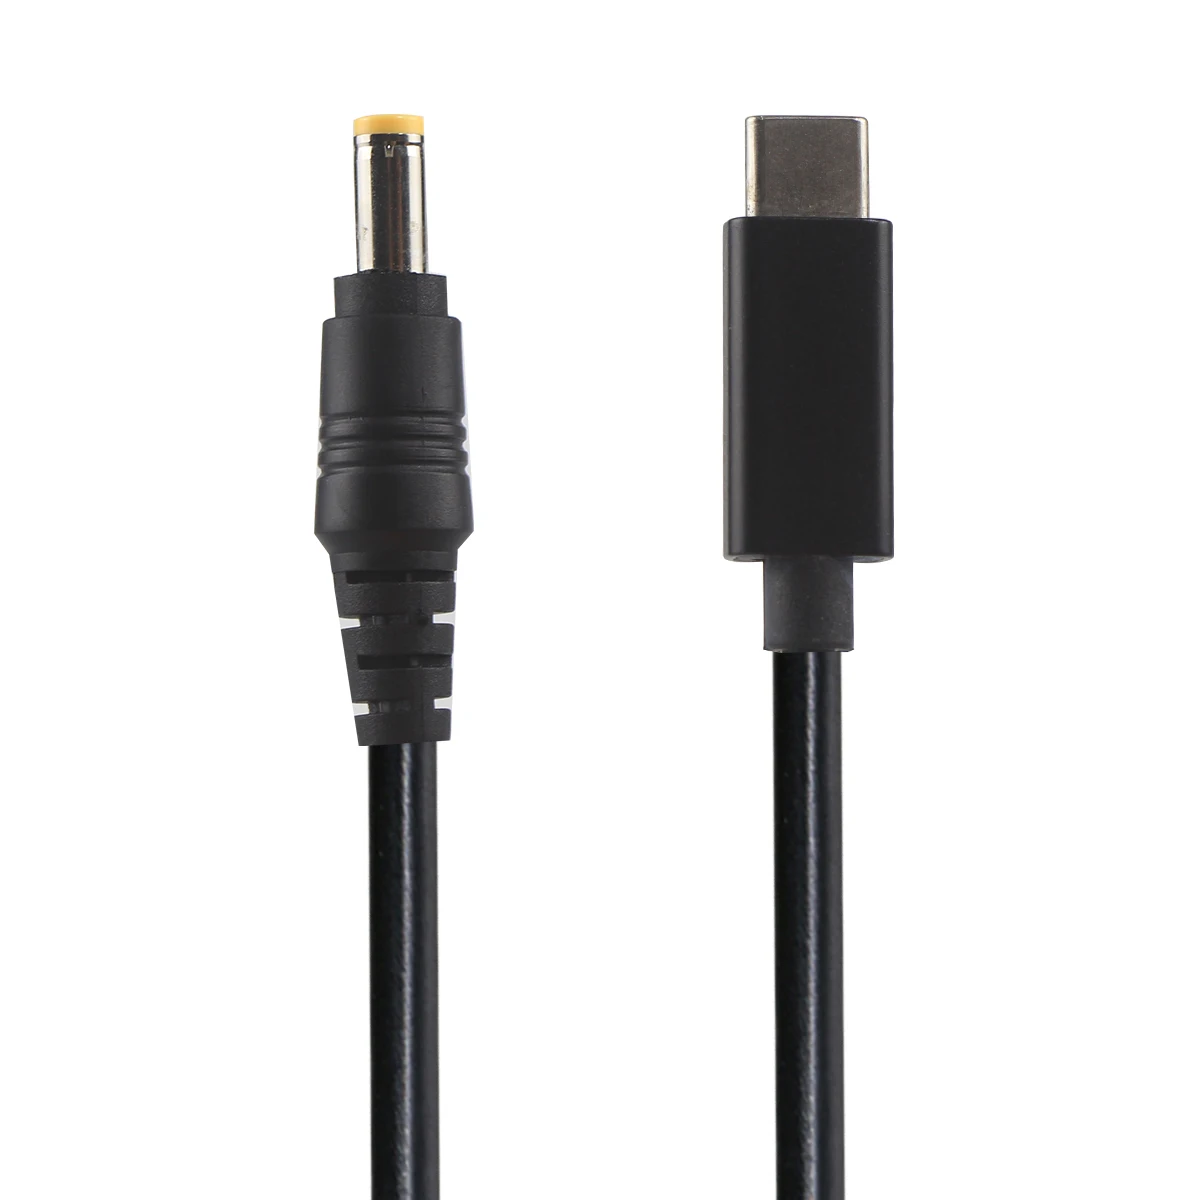 Details about   USB Cables With Bindings Plugs For Batteries Dc MX5 Ms Various Colours & Models